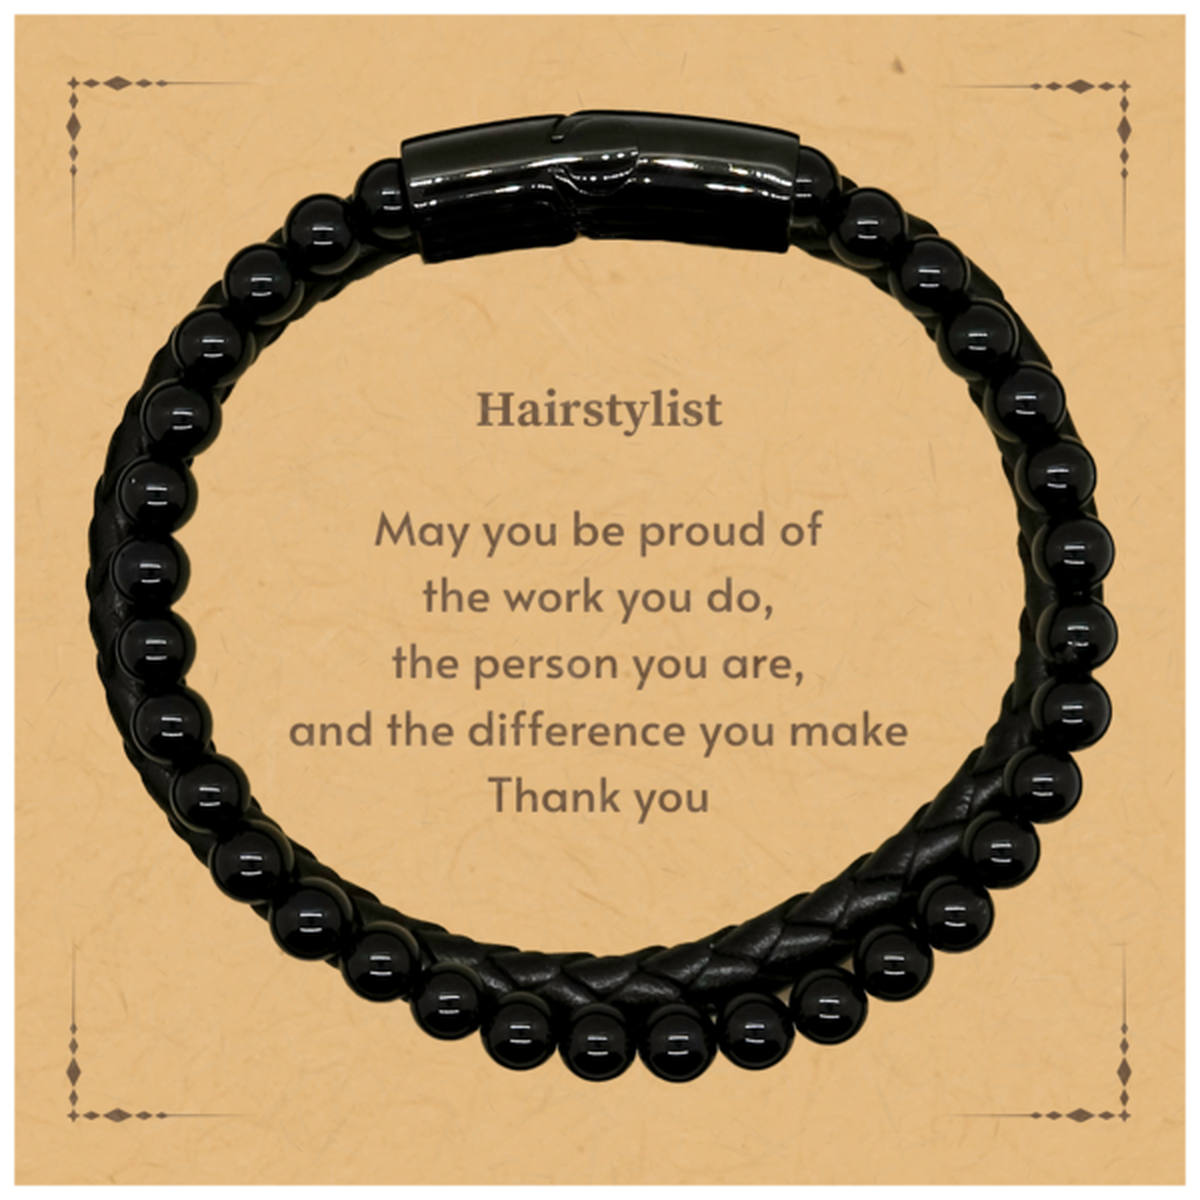 Heartwarming Stone Leather Bracelets Retirement Coworkers Gifts for Hairstylist, Hairstylist May You be proud of the work you do, the person you are Gifts for Boss Men Women Friends